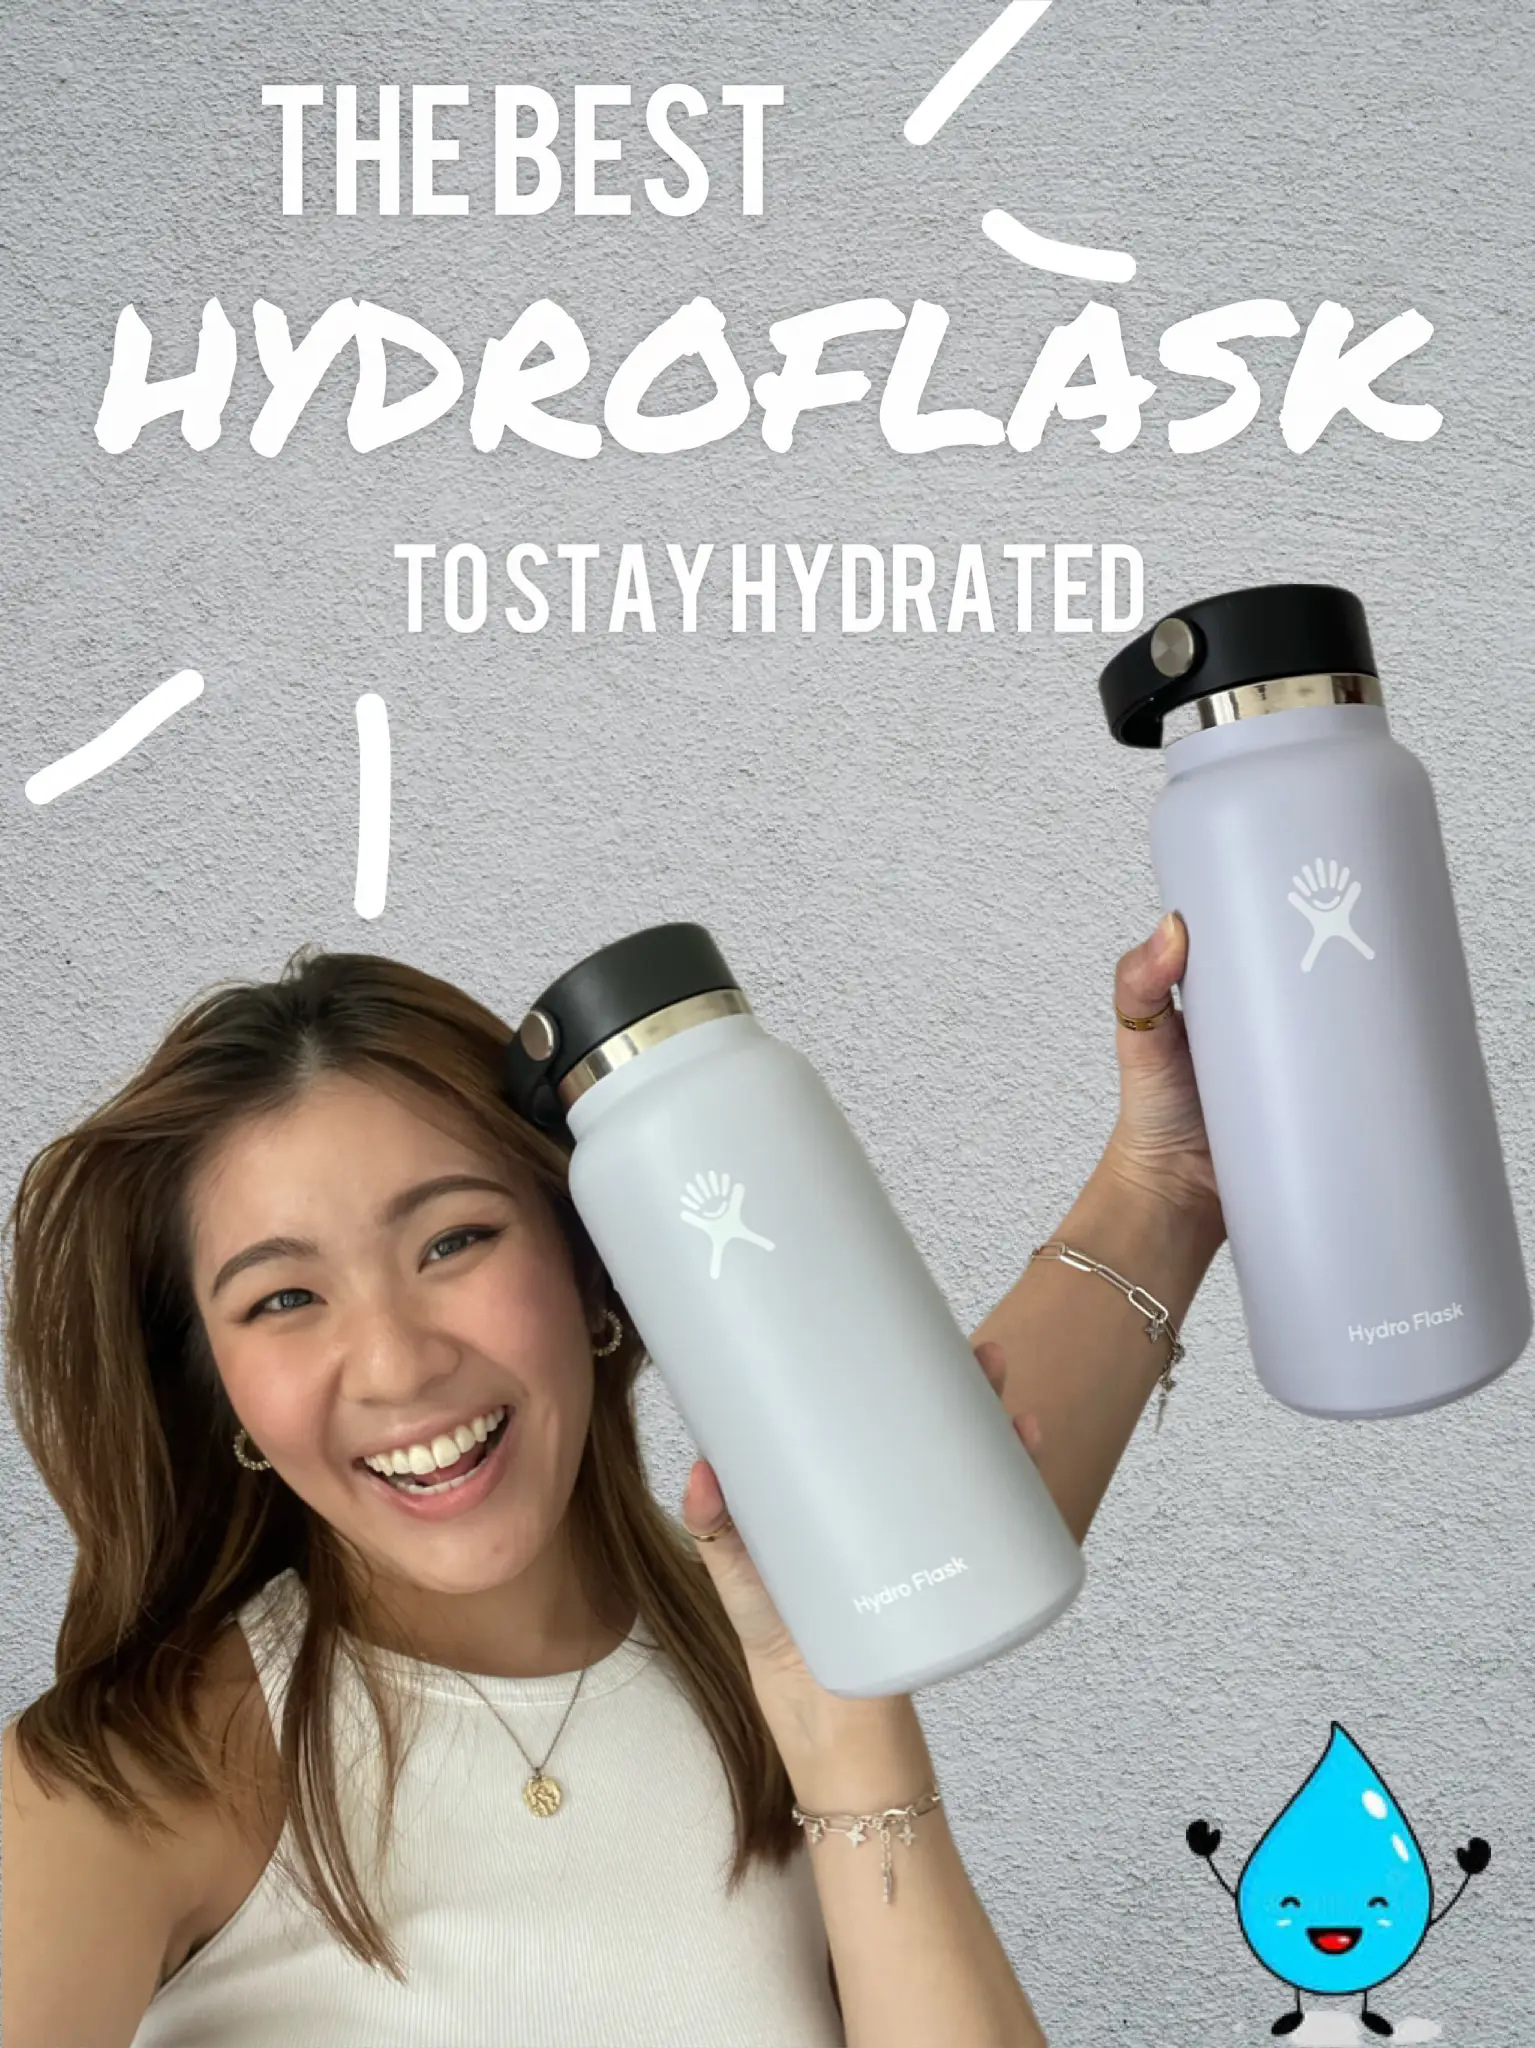 ✧˖*° DO NOT GET HYDROFLASK *° ✧˖